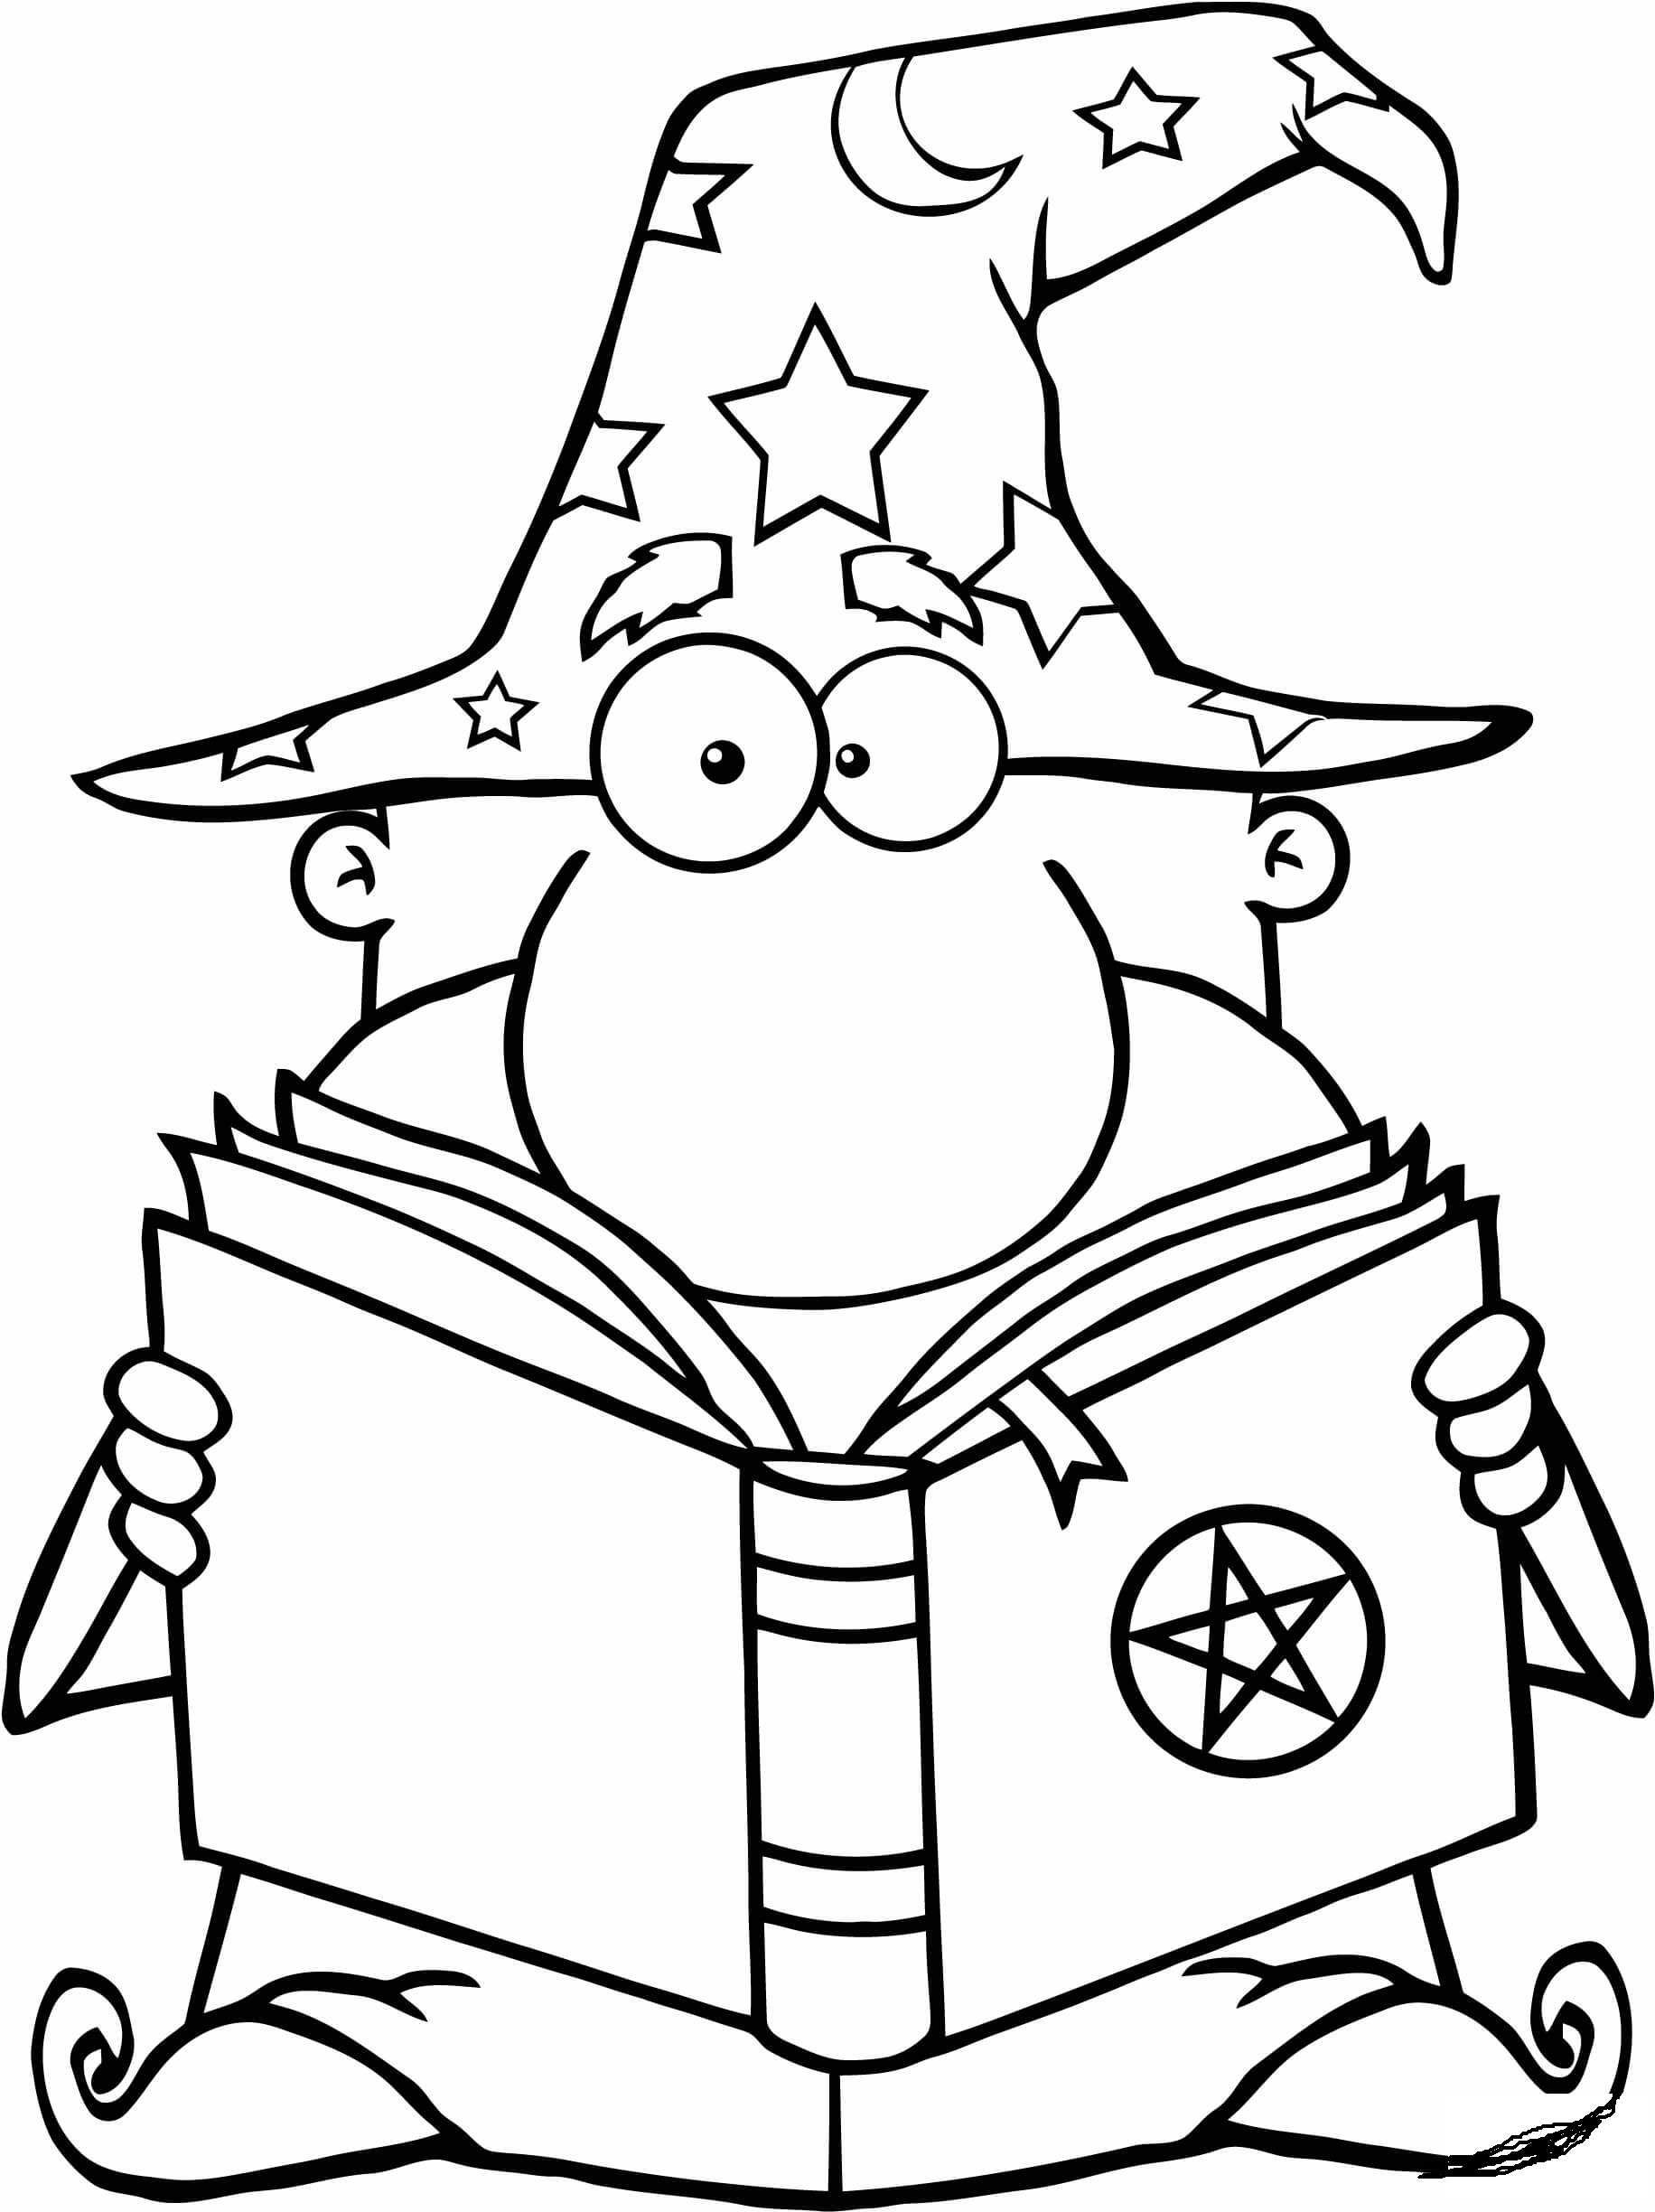 Funny Wizard Holding A Magic Book